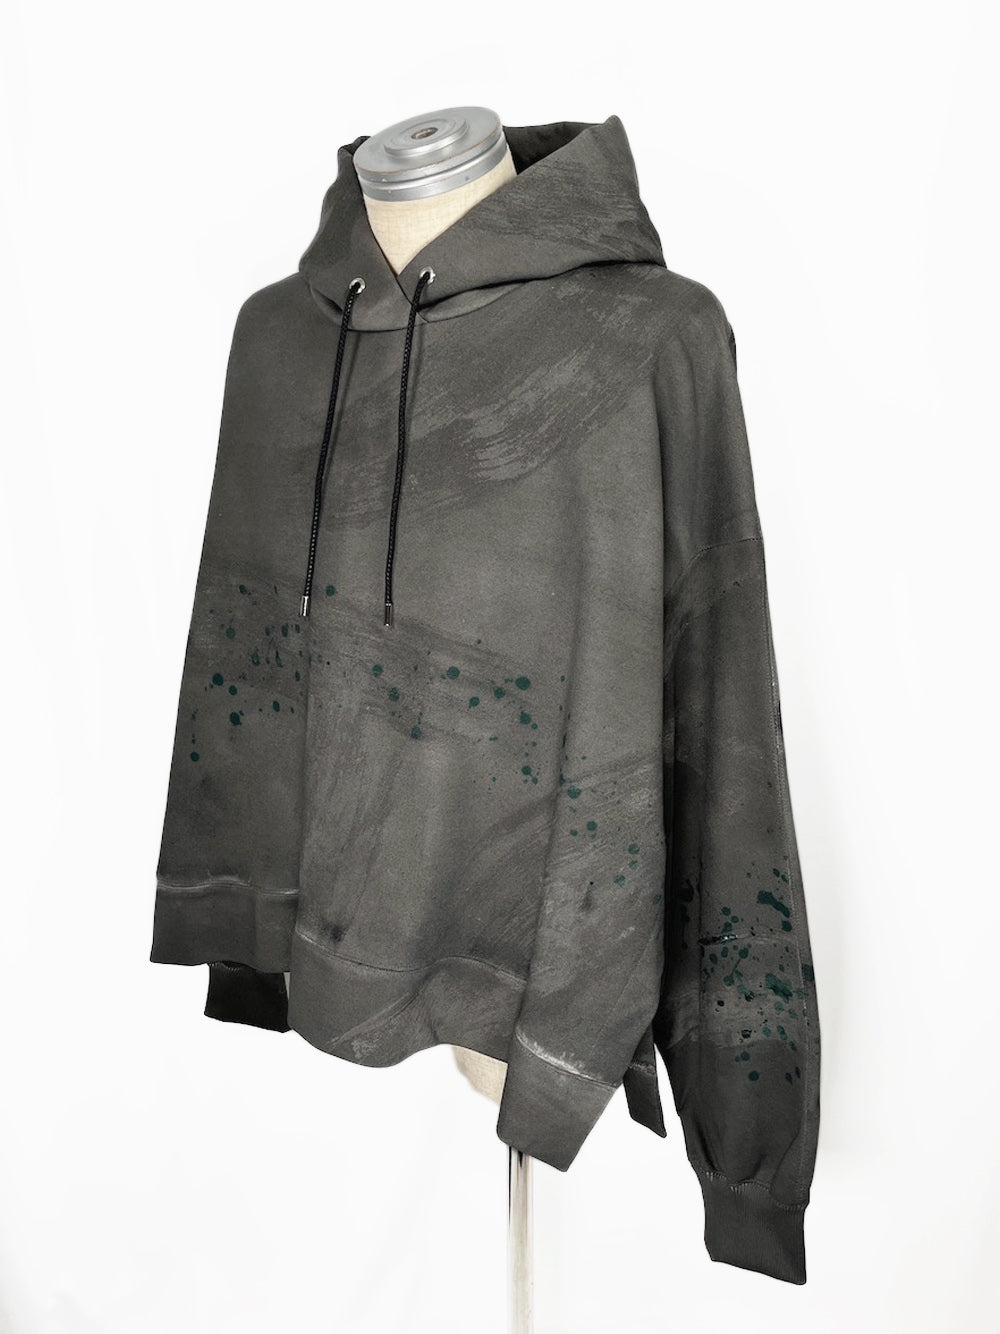 LB23AW-PK01-STC | 3D plaster style pigment hoodie | IRON 